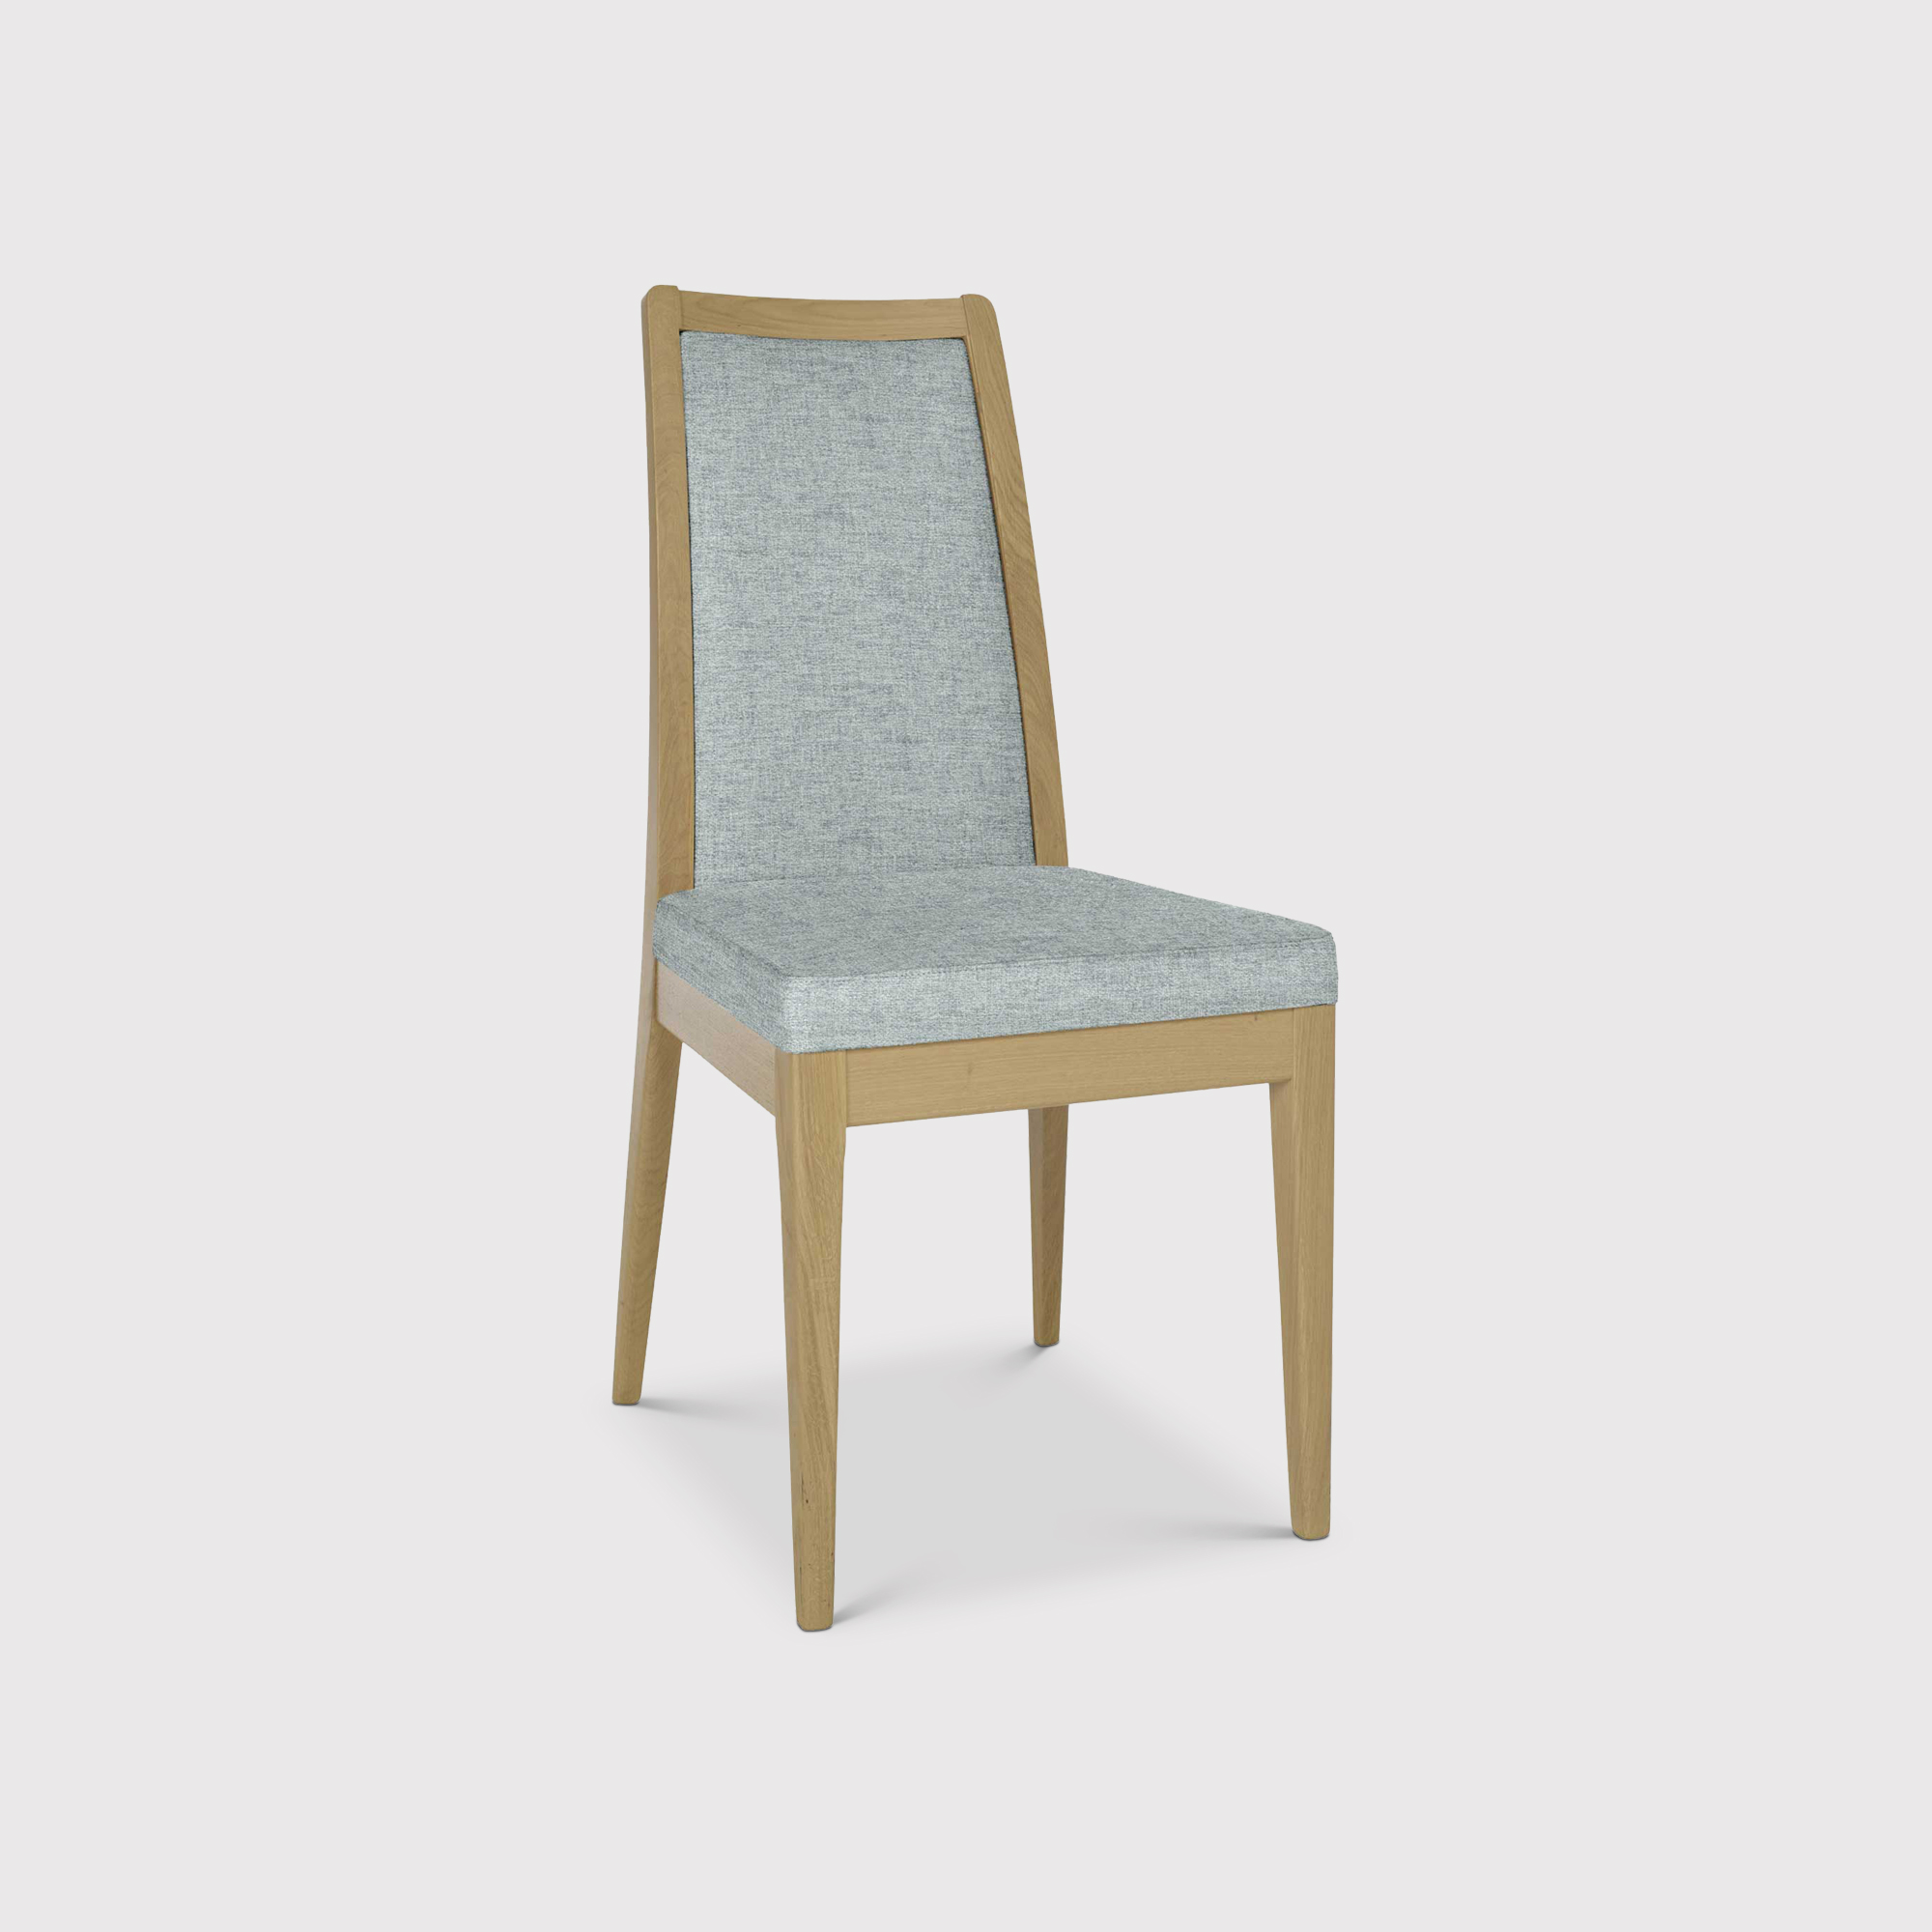 Ercol Romana Padded Back Dining Chair, Grey | Barker & Stonehouse